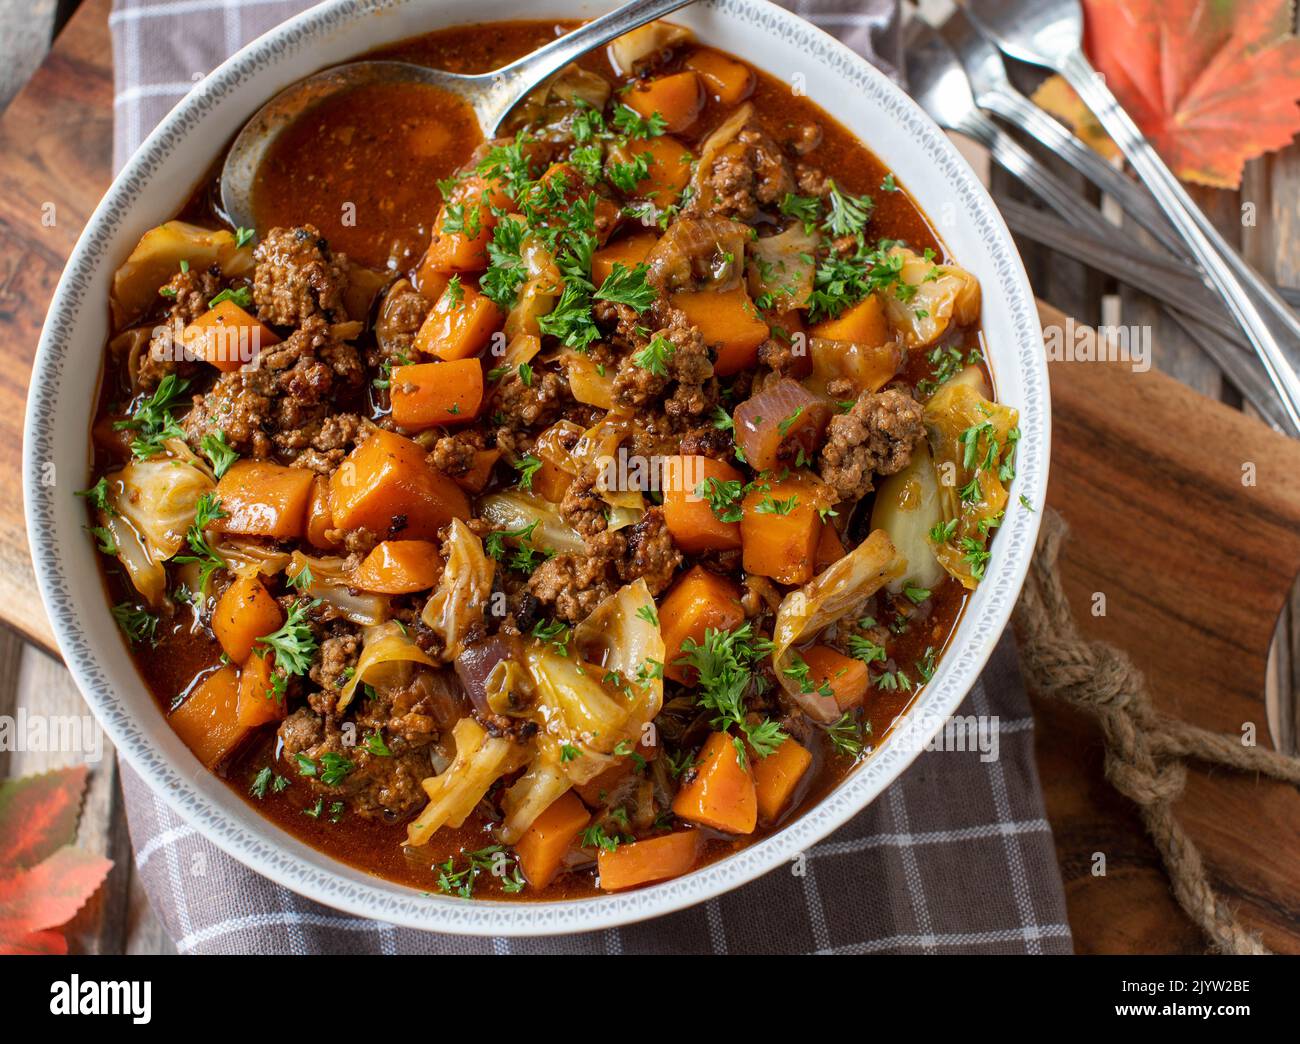 Minced meat stew with cabbage and carrots in bowl Stock Photo